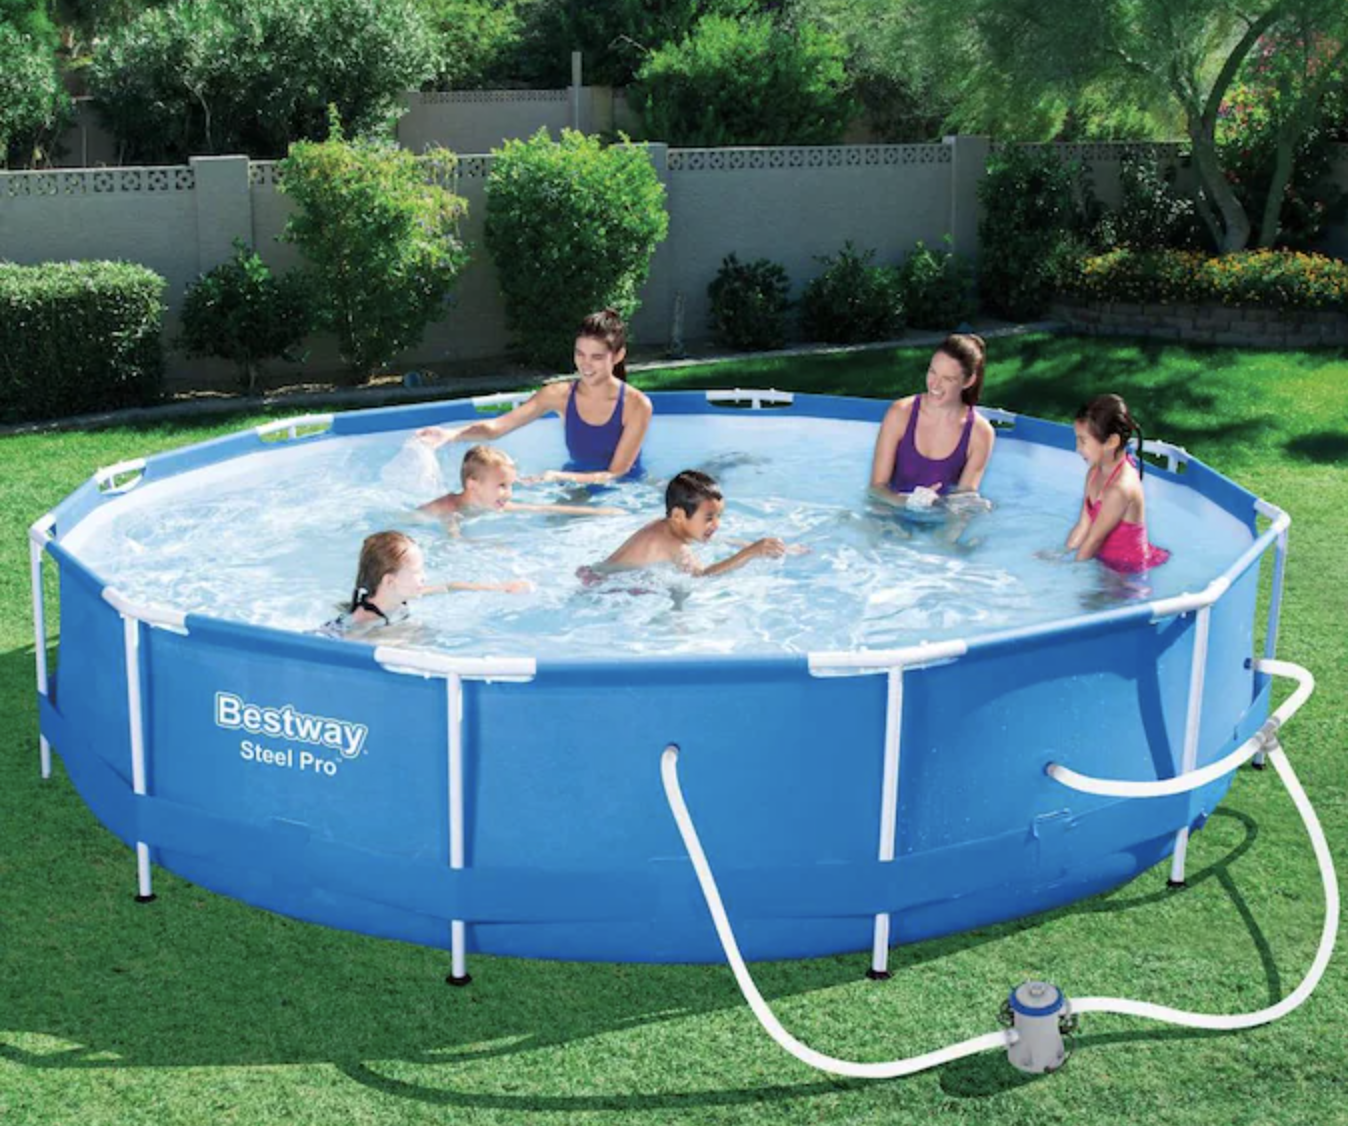 a family enjoying the above ground pool in a yard